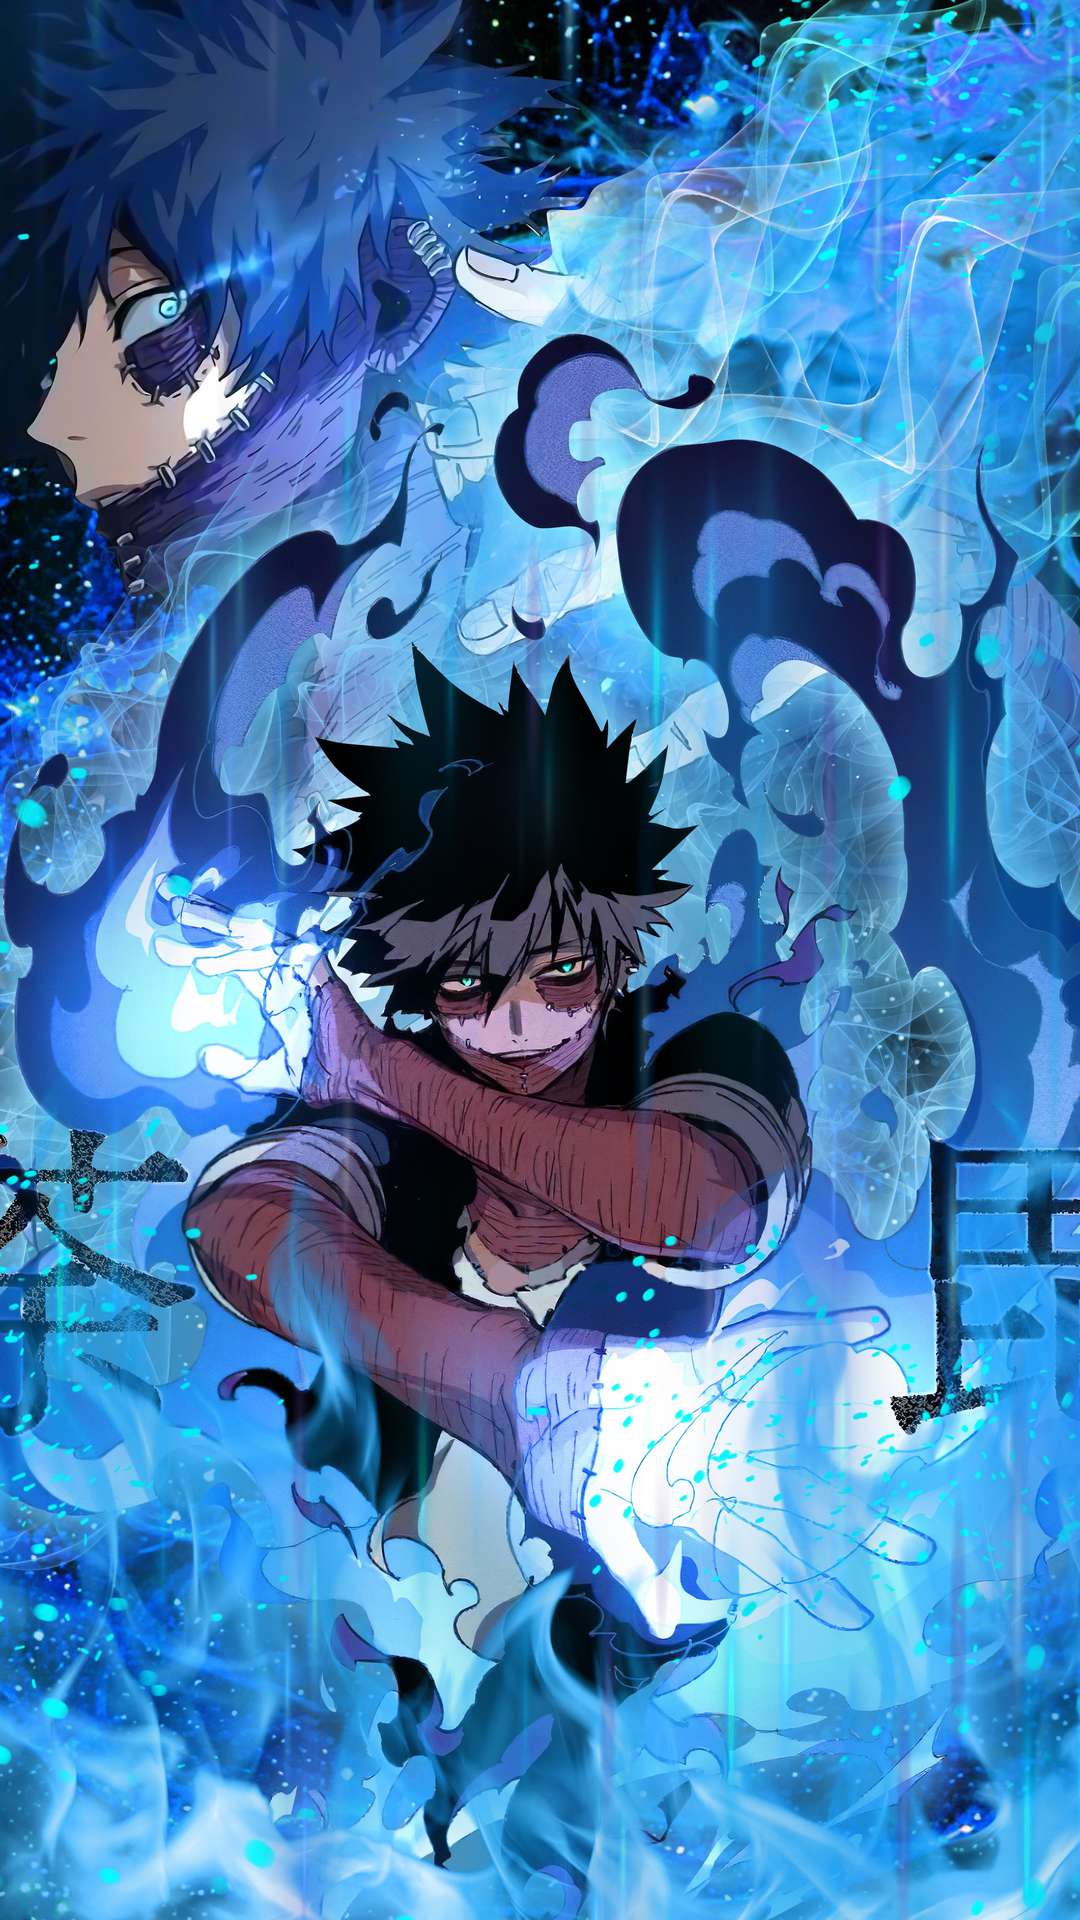 My Hero Academia Wallpaper HD APK pour Android Télécharger